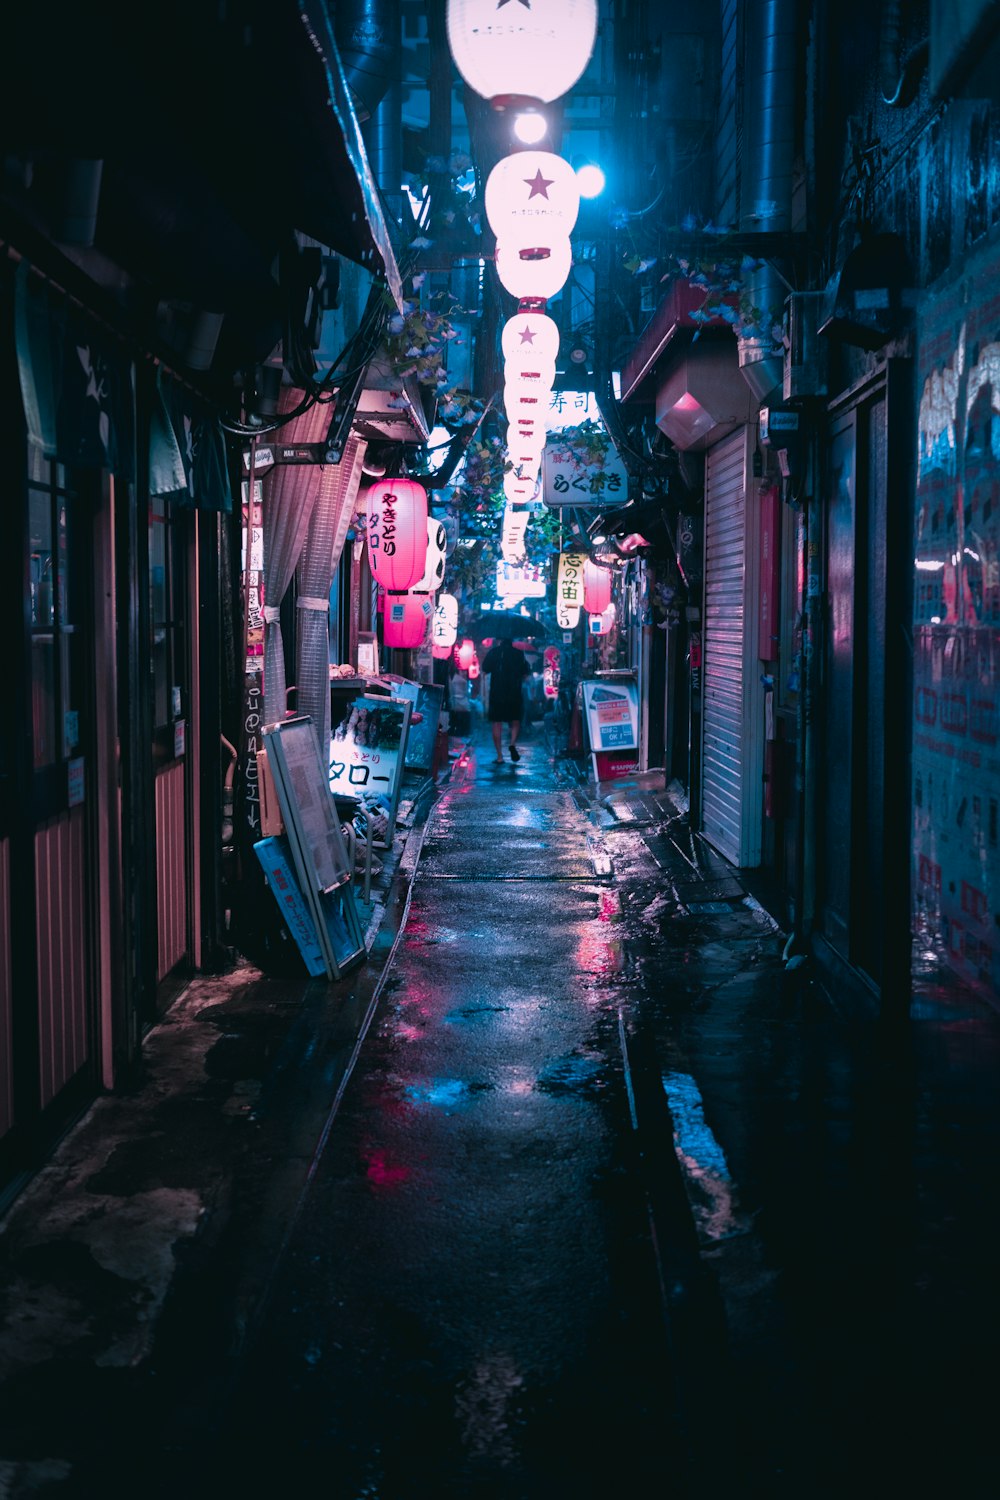 A street with many signs on it photo – Free Tokyo Image on Unsplash